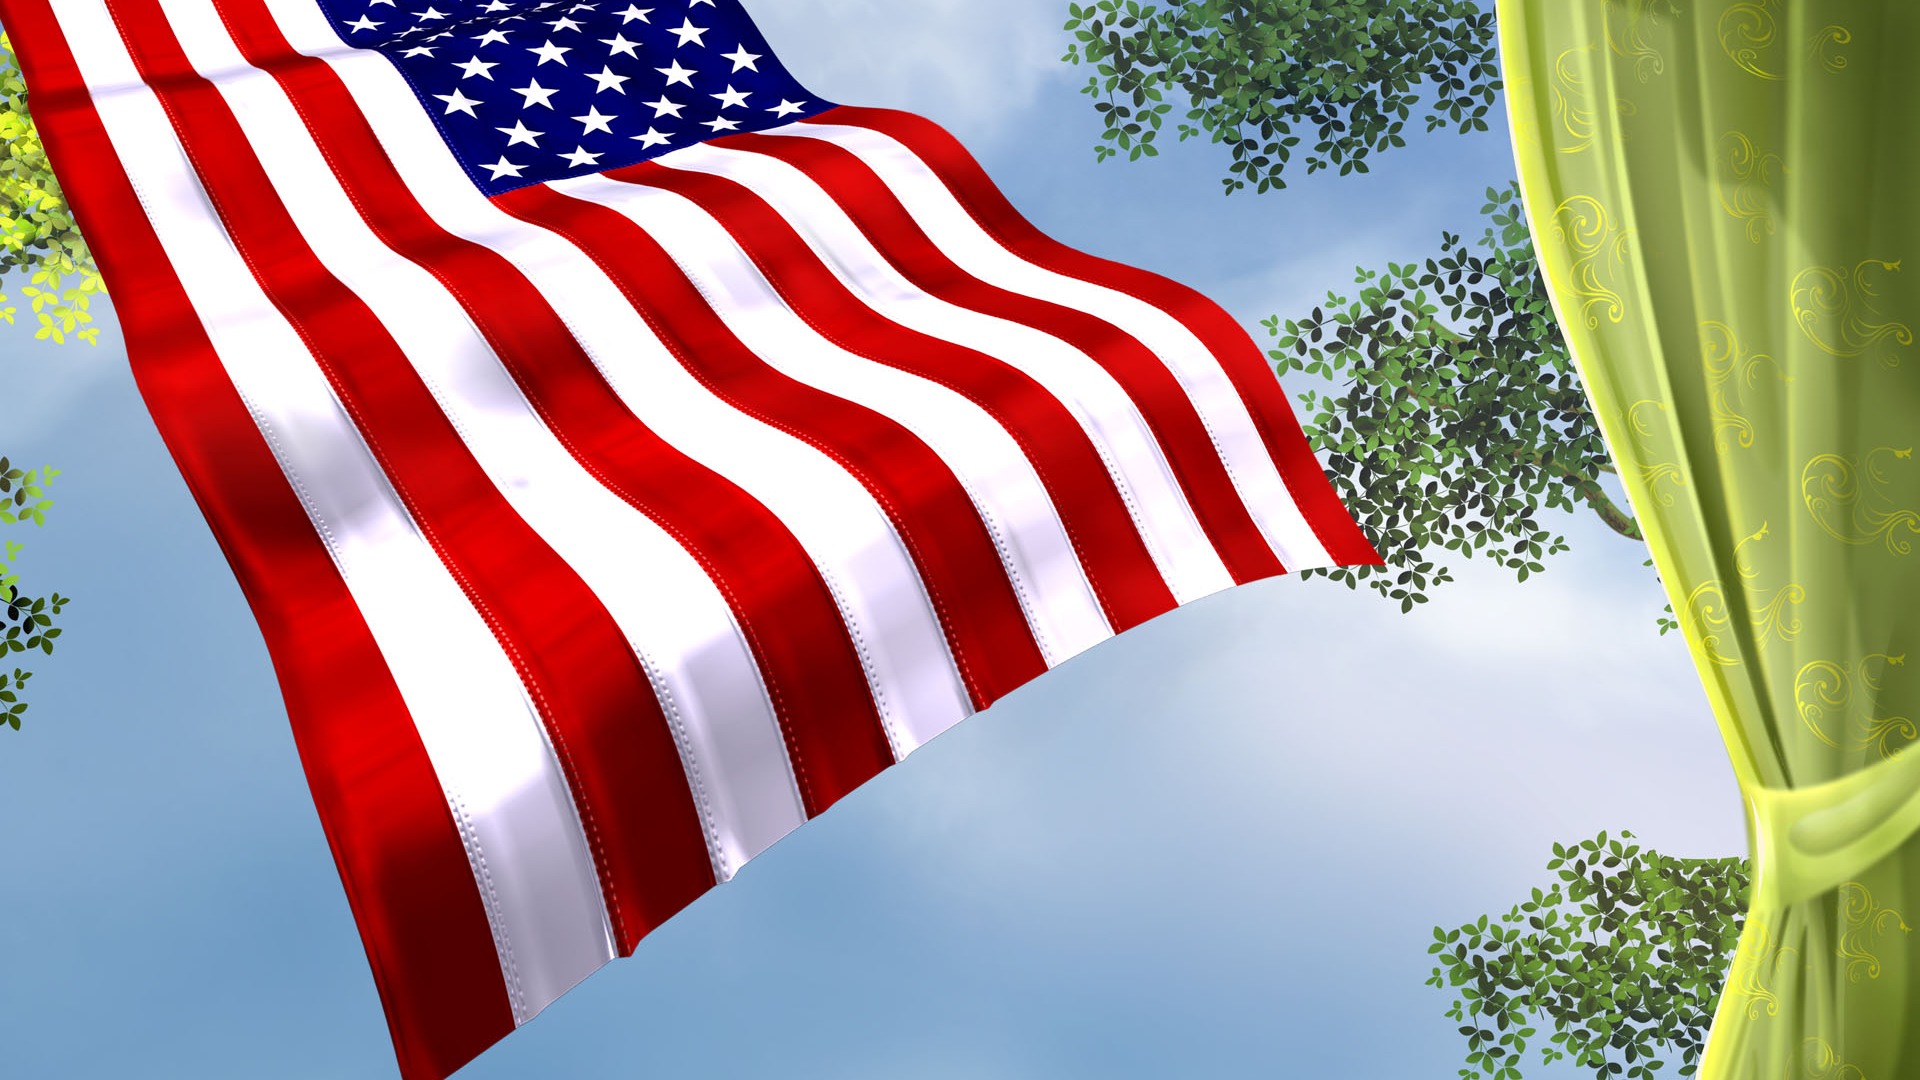 U.S. Independence Day theme wallpaper #33 - 1920x1080